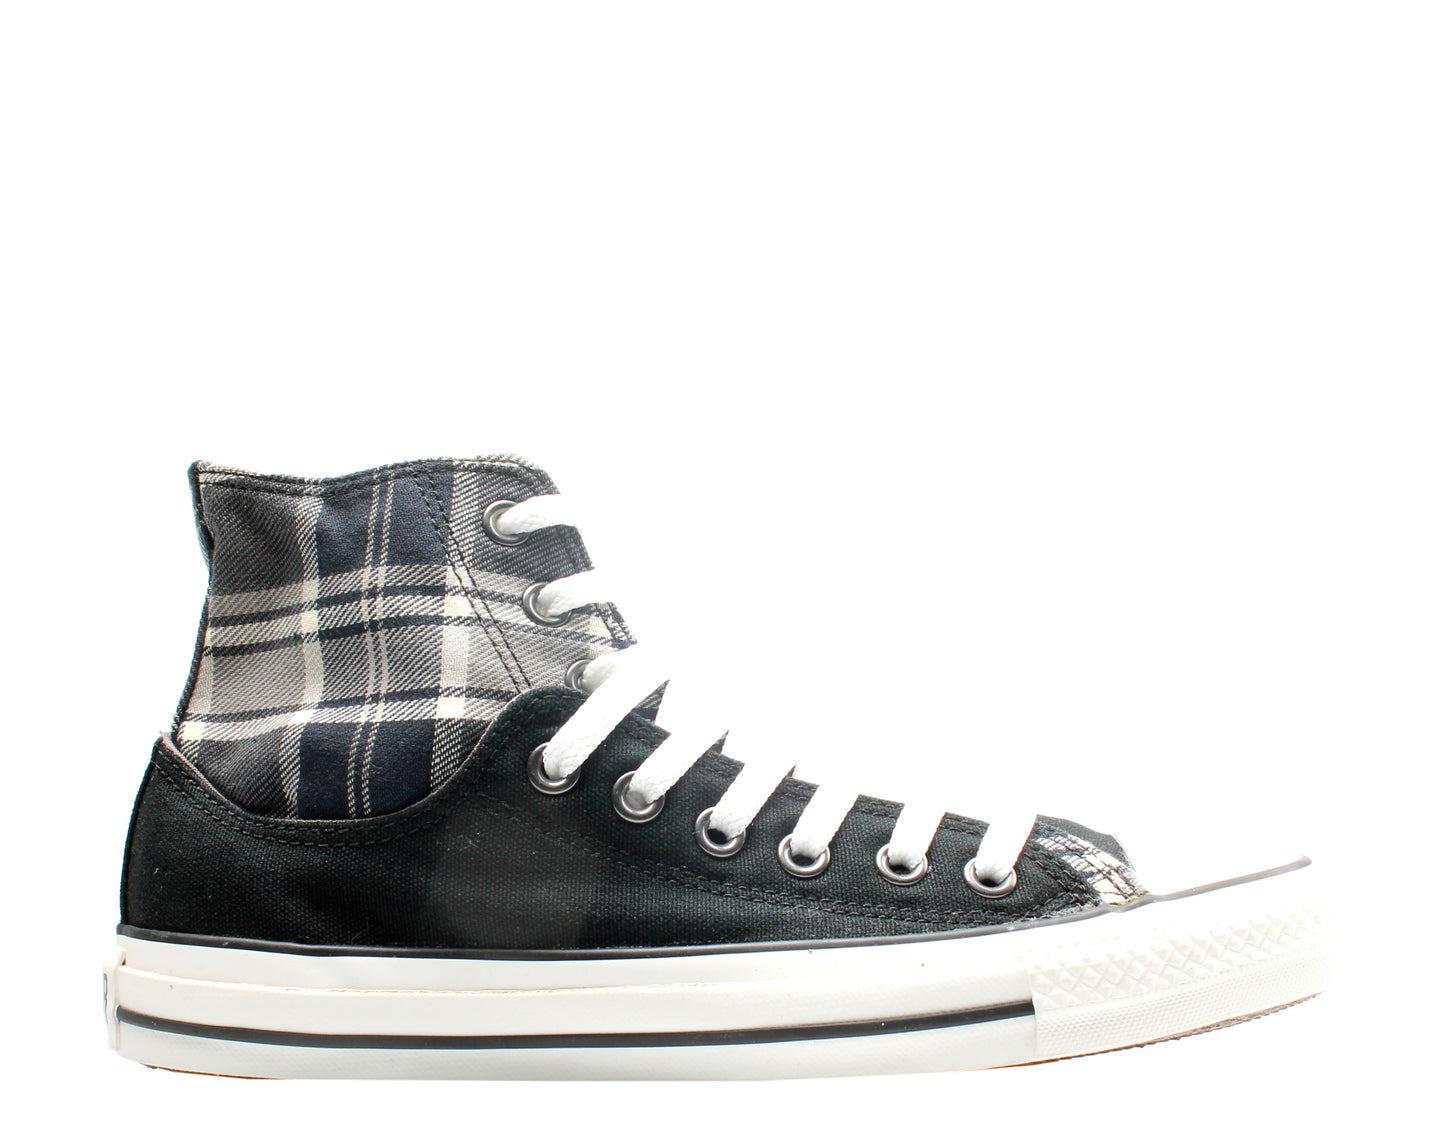 Converse Chuck Taylor All Star Layer Up Plaid Black/Grey High Top Sneakers 111159